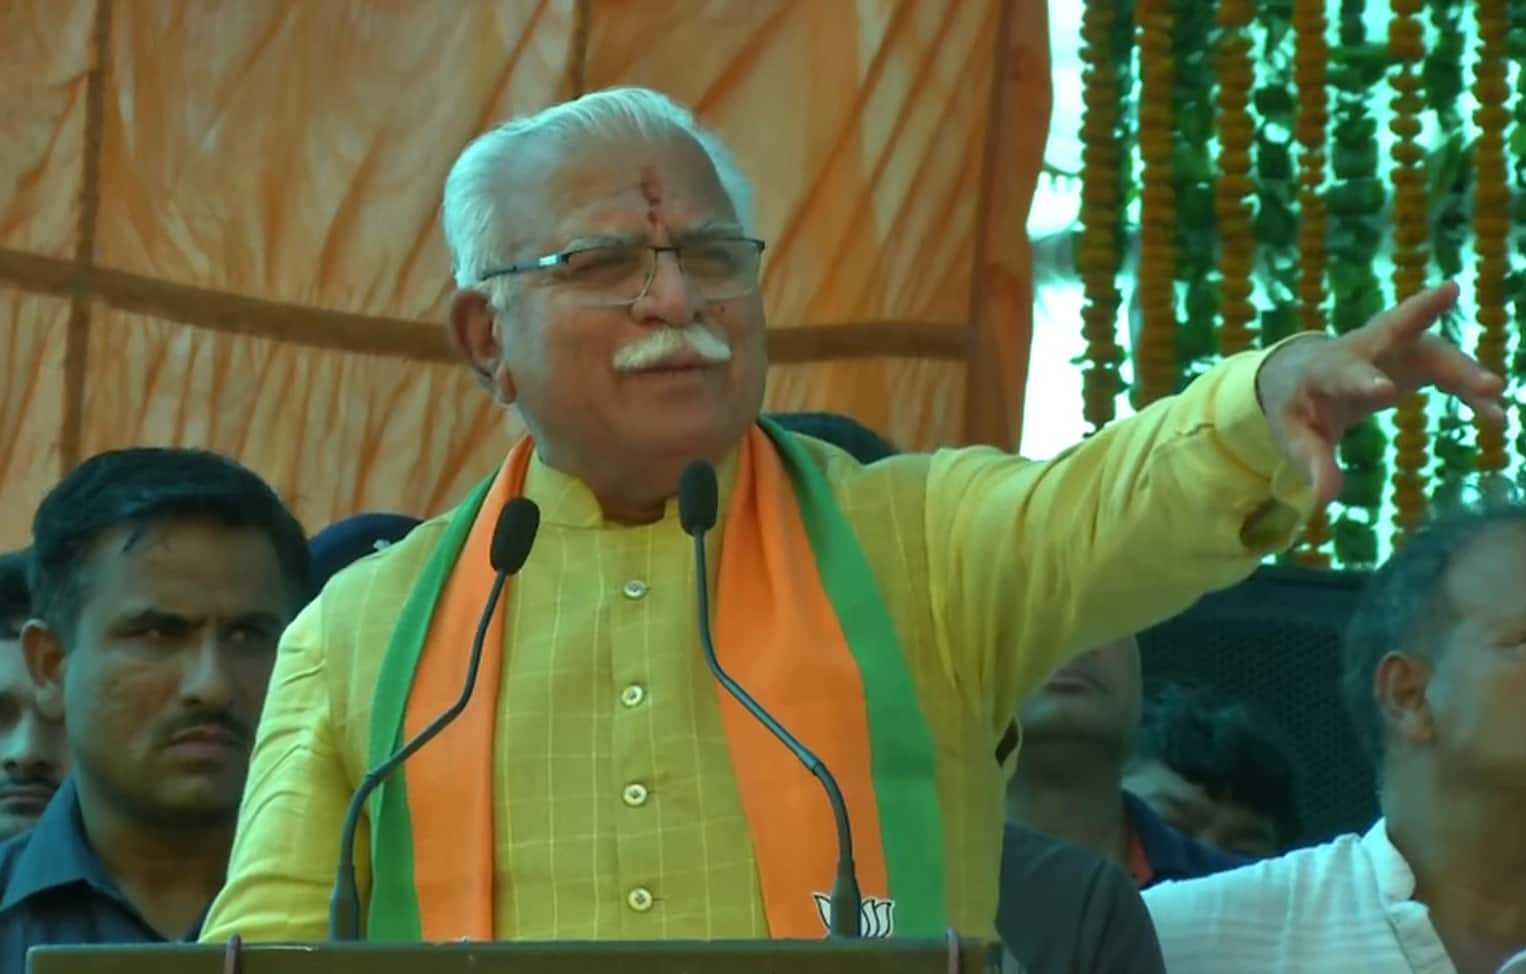 MLA who poses challenge to Manohar Lal Khattar government in Haryana is BJP rebel